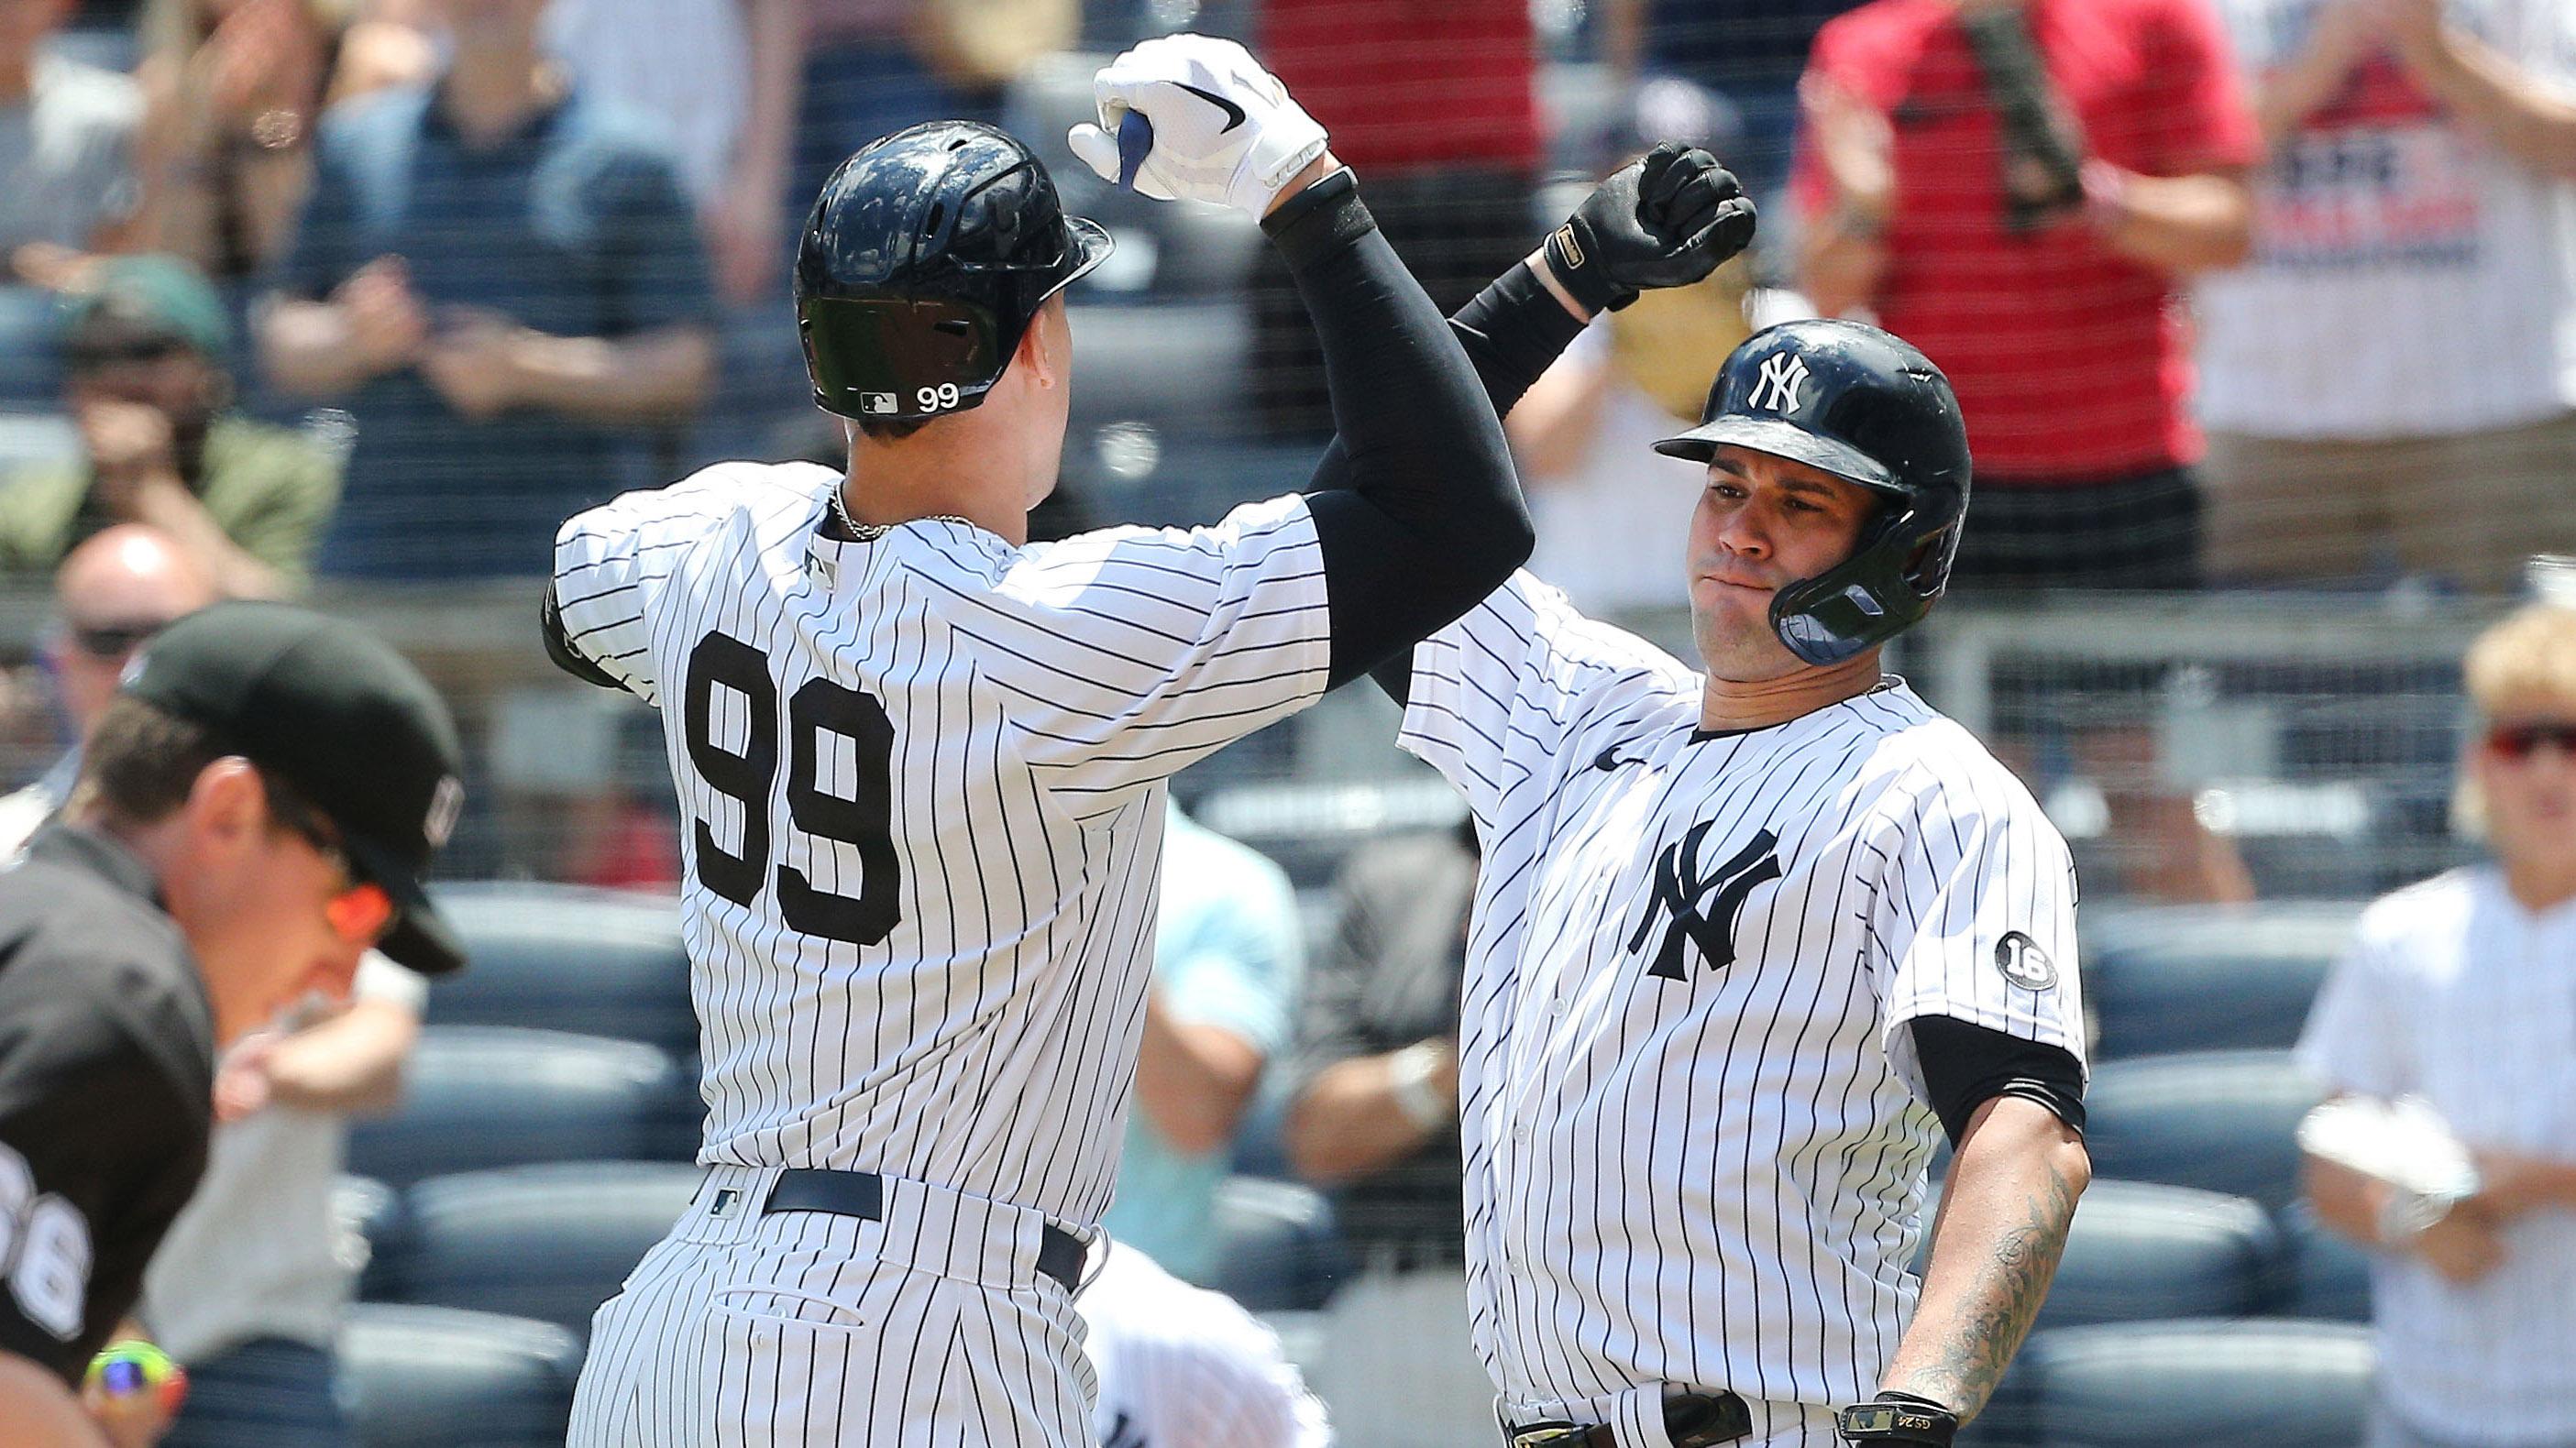 New York Yankees right fielder Aaron Judge (99) is congratulated by catcher Gary Sanchez (24) after hitting a solo home run against the Kansas City Royals during the first inning at Yankee Stadium. / Andy Marlin-USA TODAY Sports